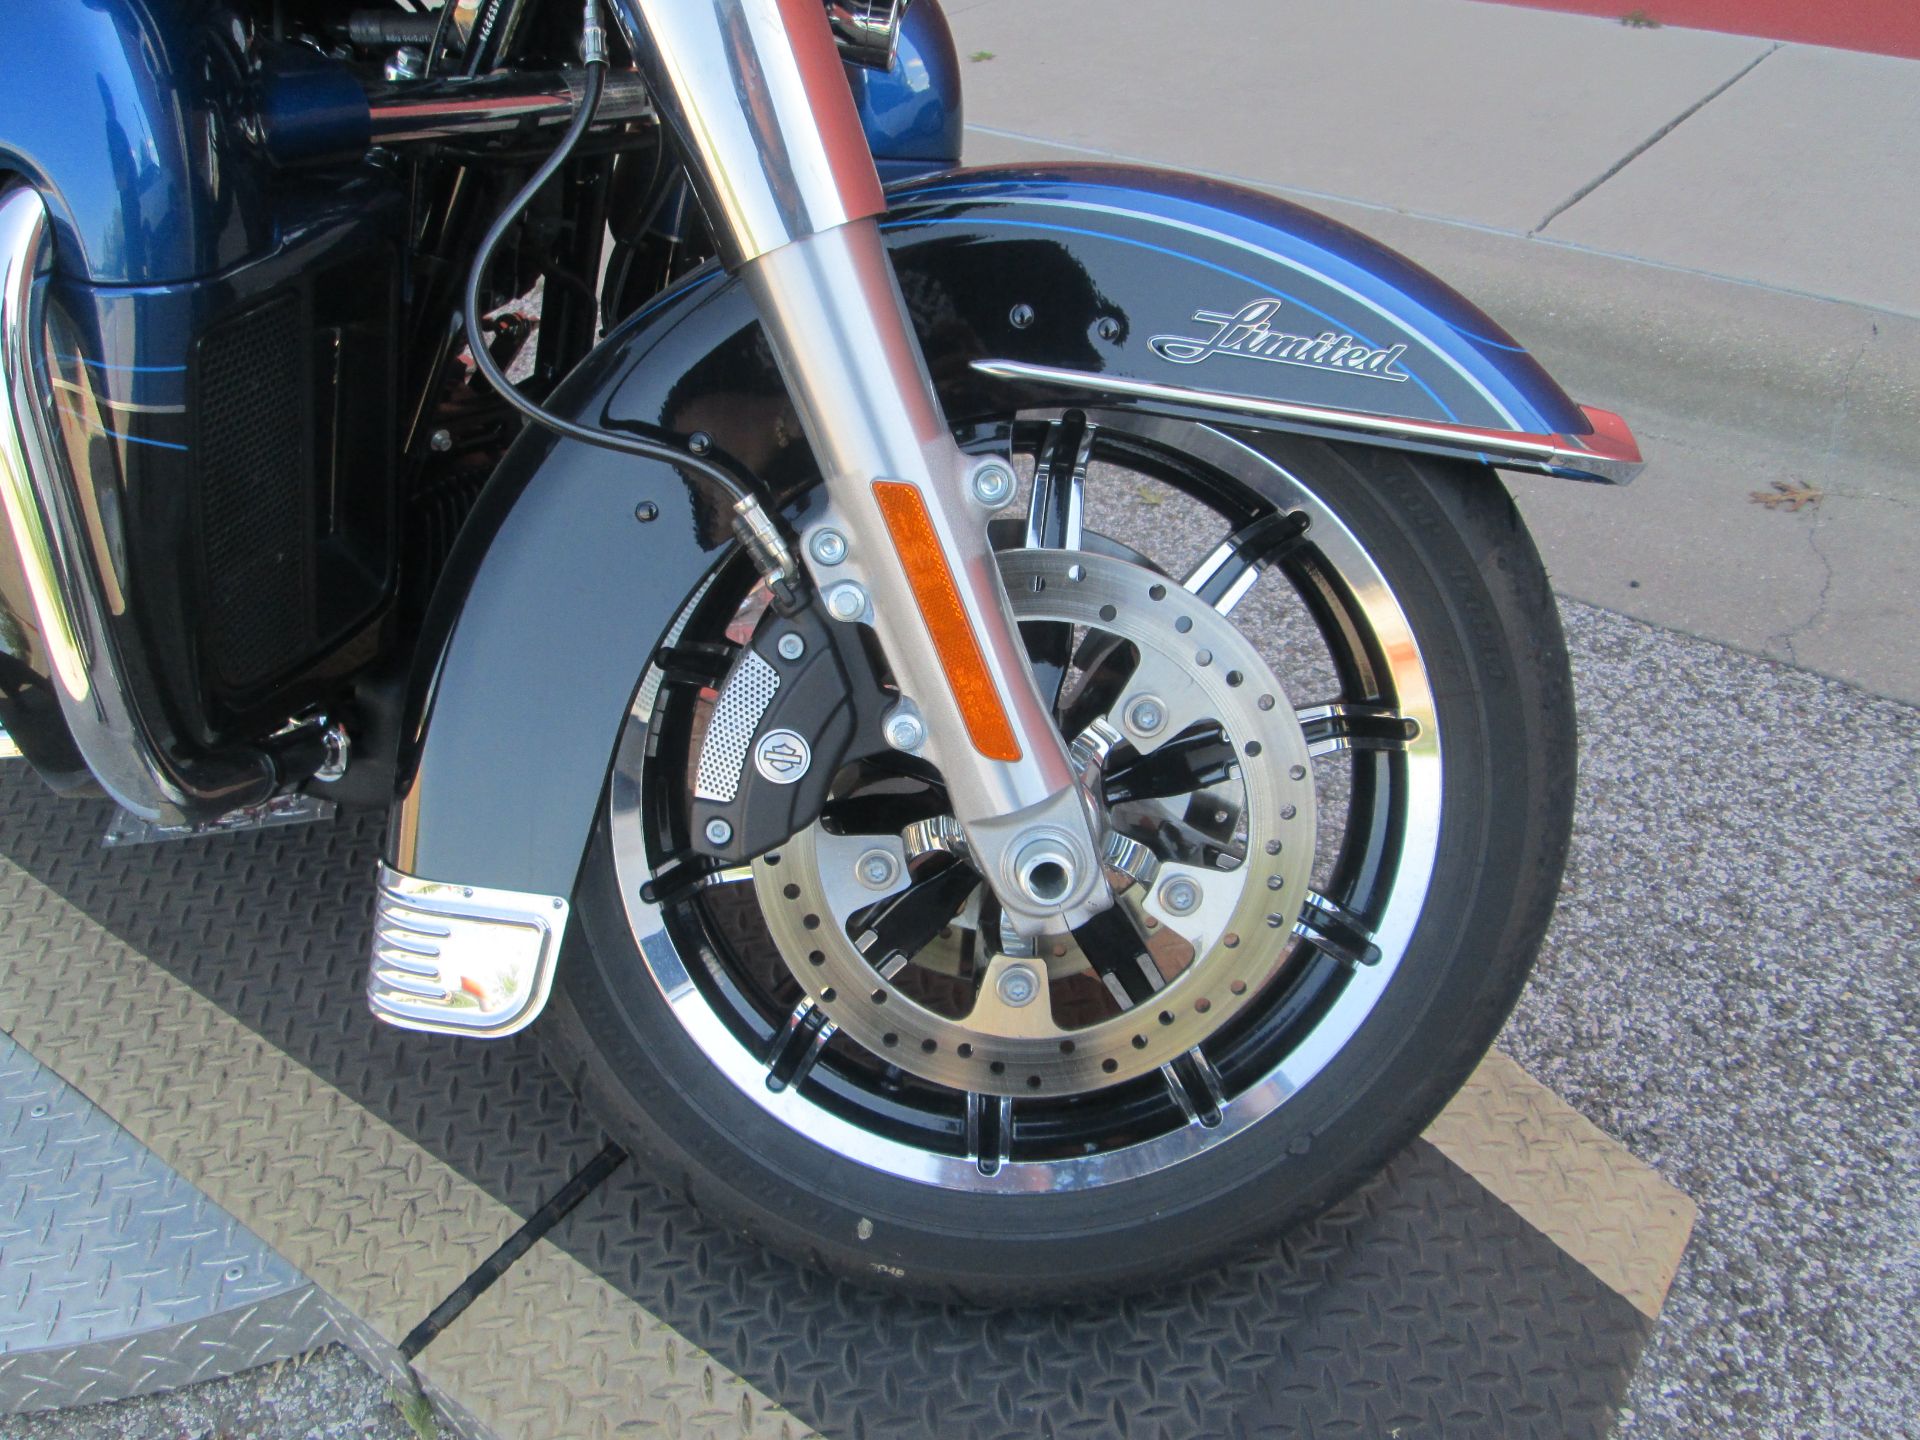 2018 Harley-Davidson 115th Anniversary Ultra Limited in Temple, Texas - Photo 5